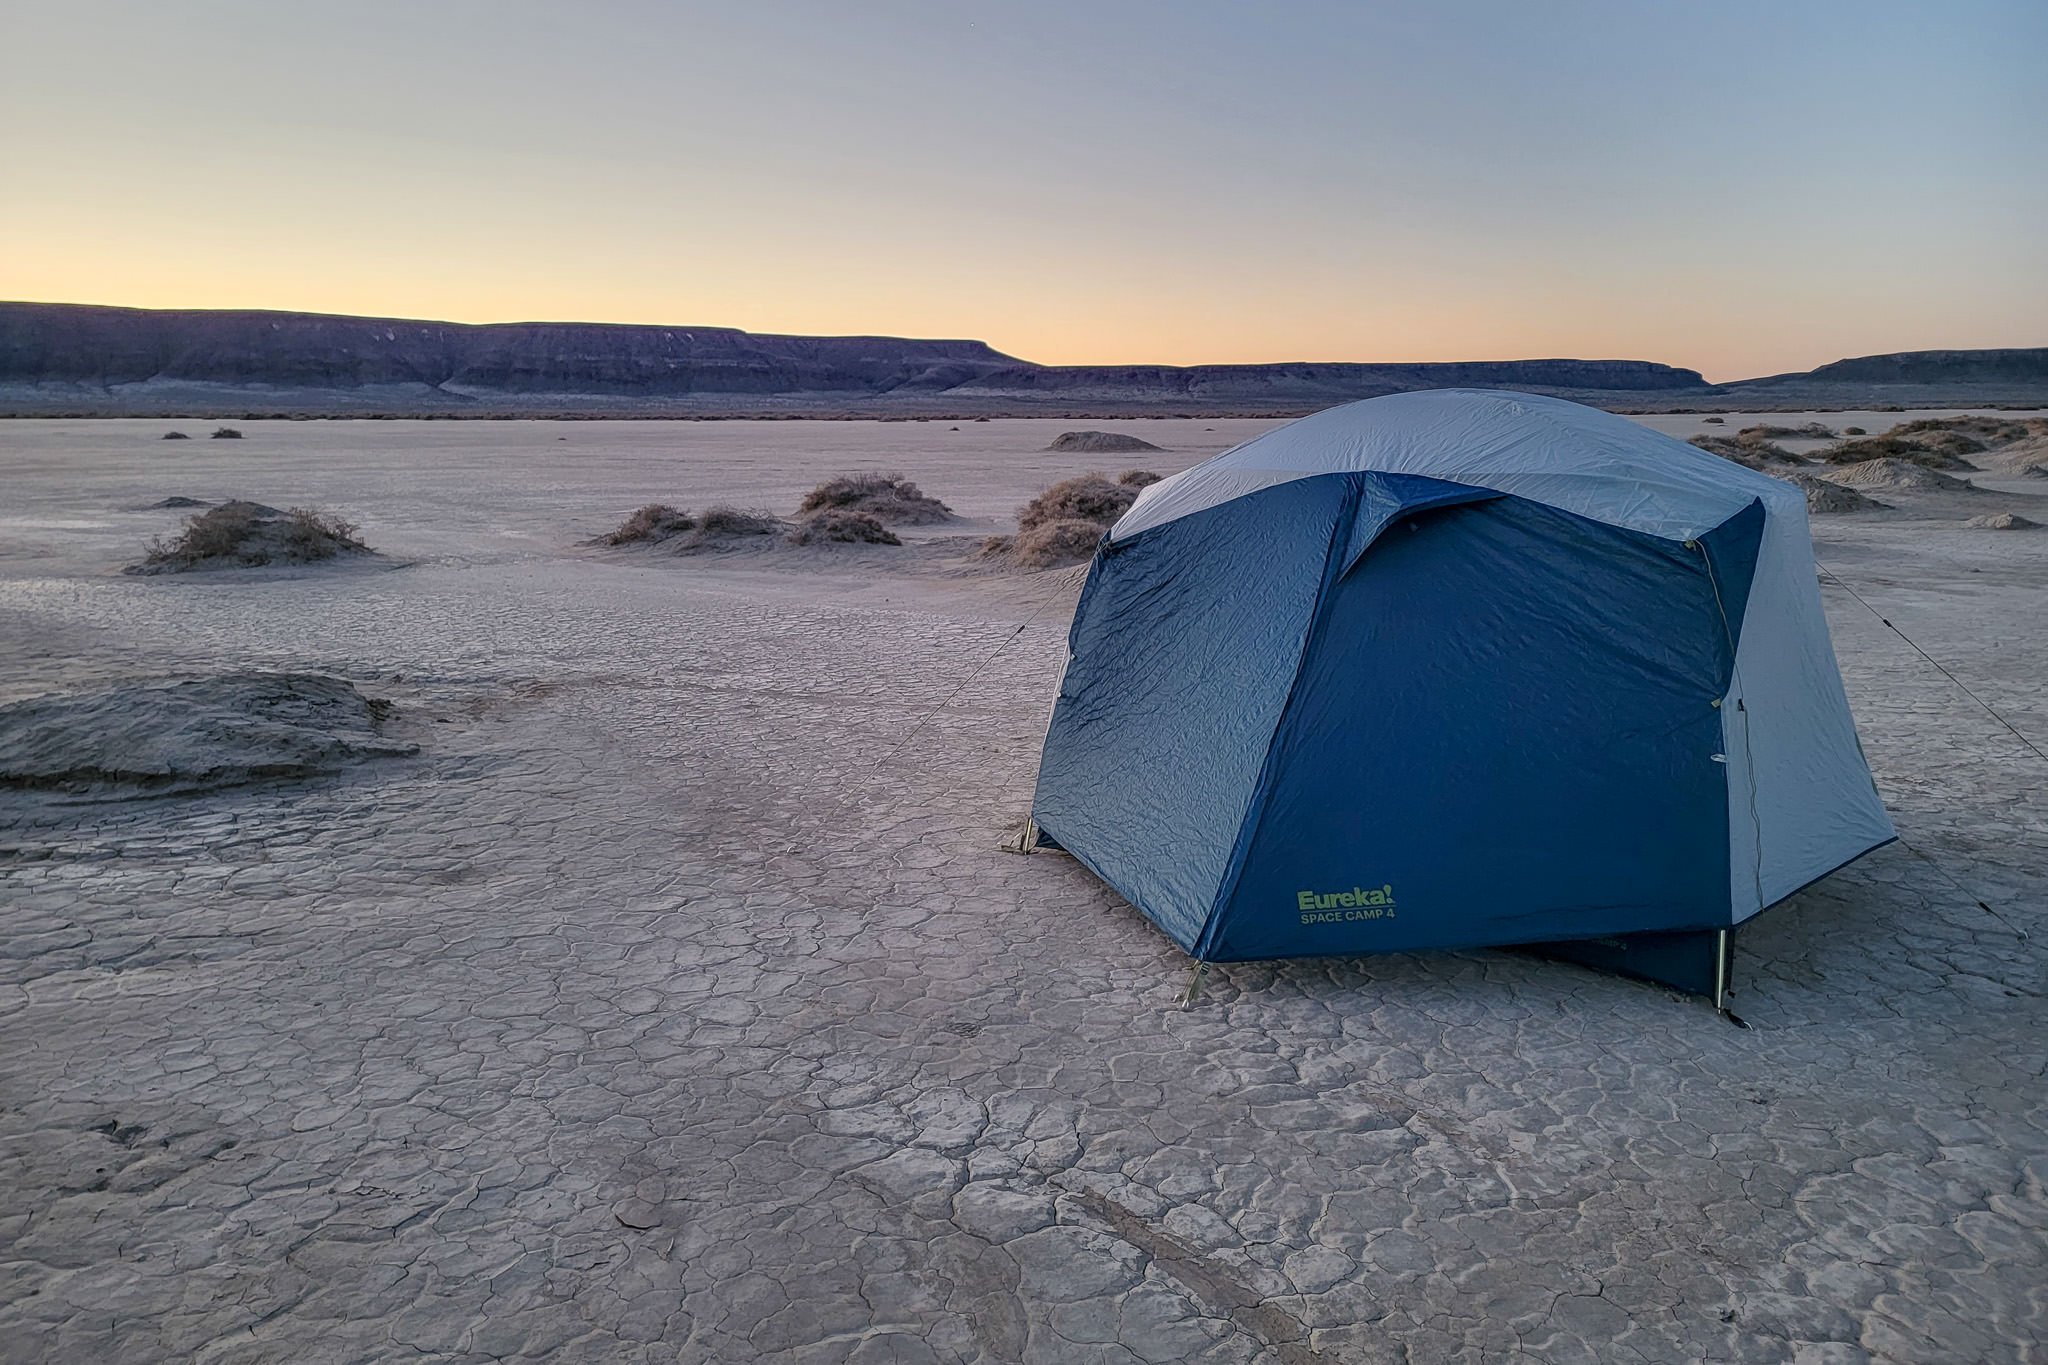 The Eureka Space Camp 4 tent in the Alvord Desert